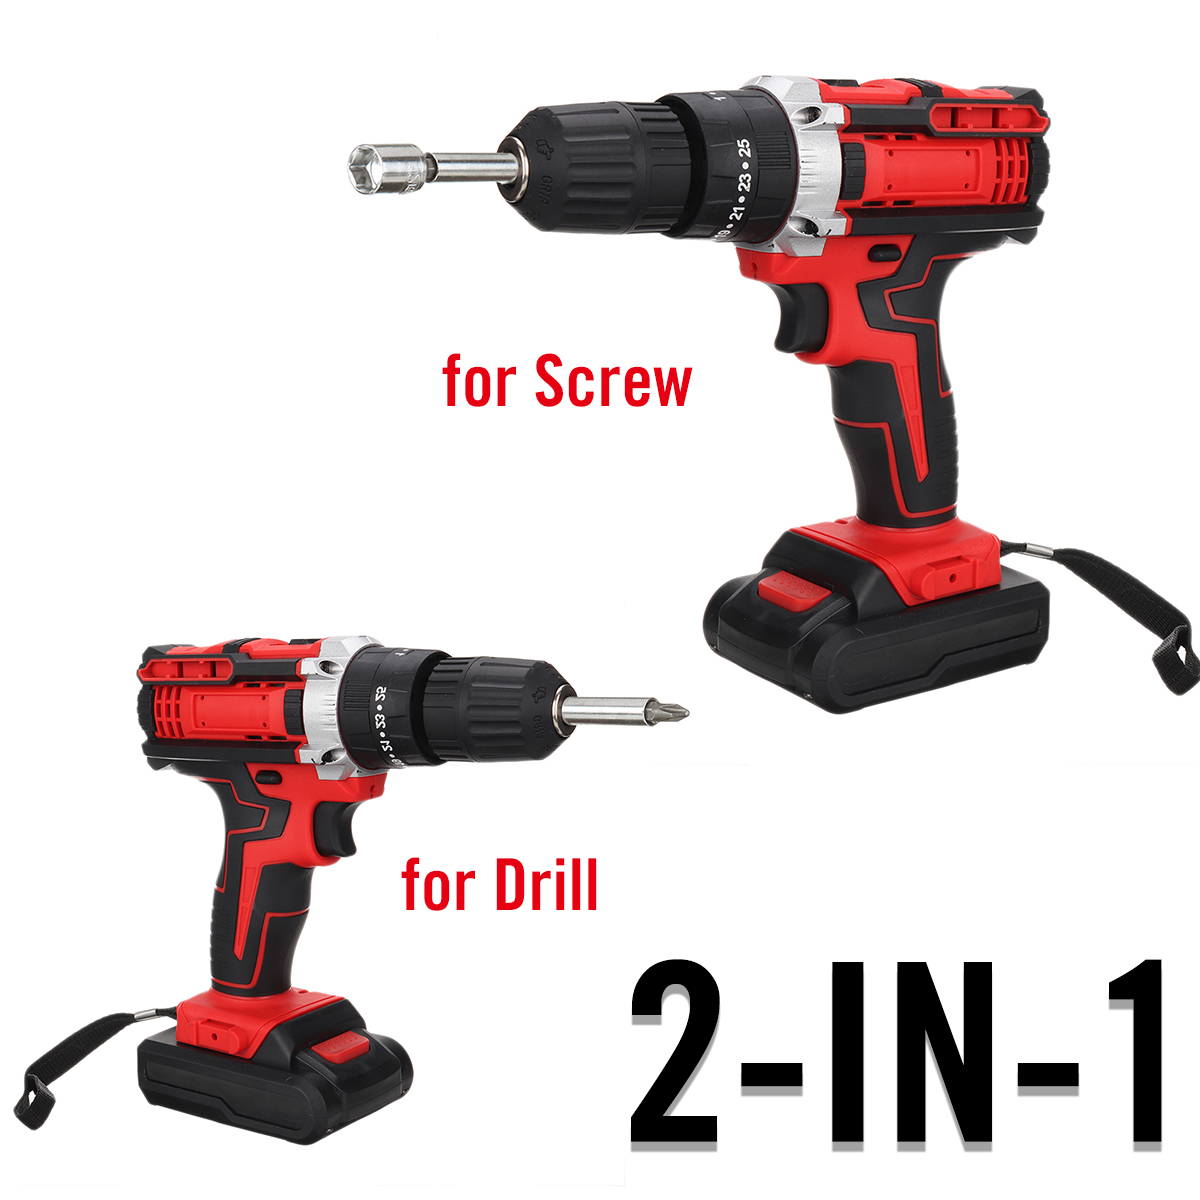 Cordless-Rechargeable-Electric-Drill-Screwdriver-LED-Portable-Metal-Wood-Drilling-Tool-W-12pcs-Batte-1848724-3